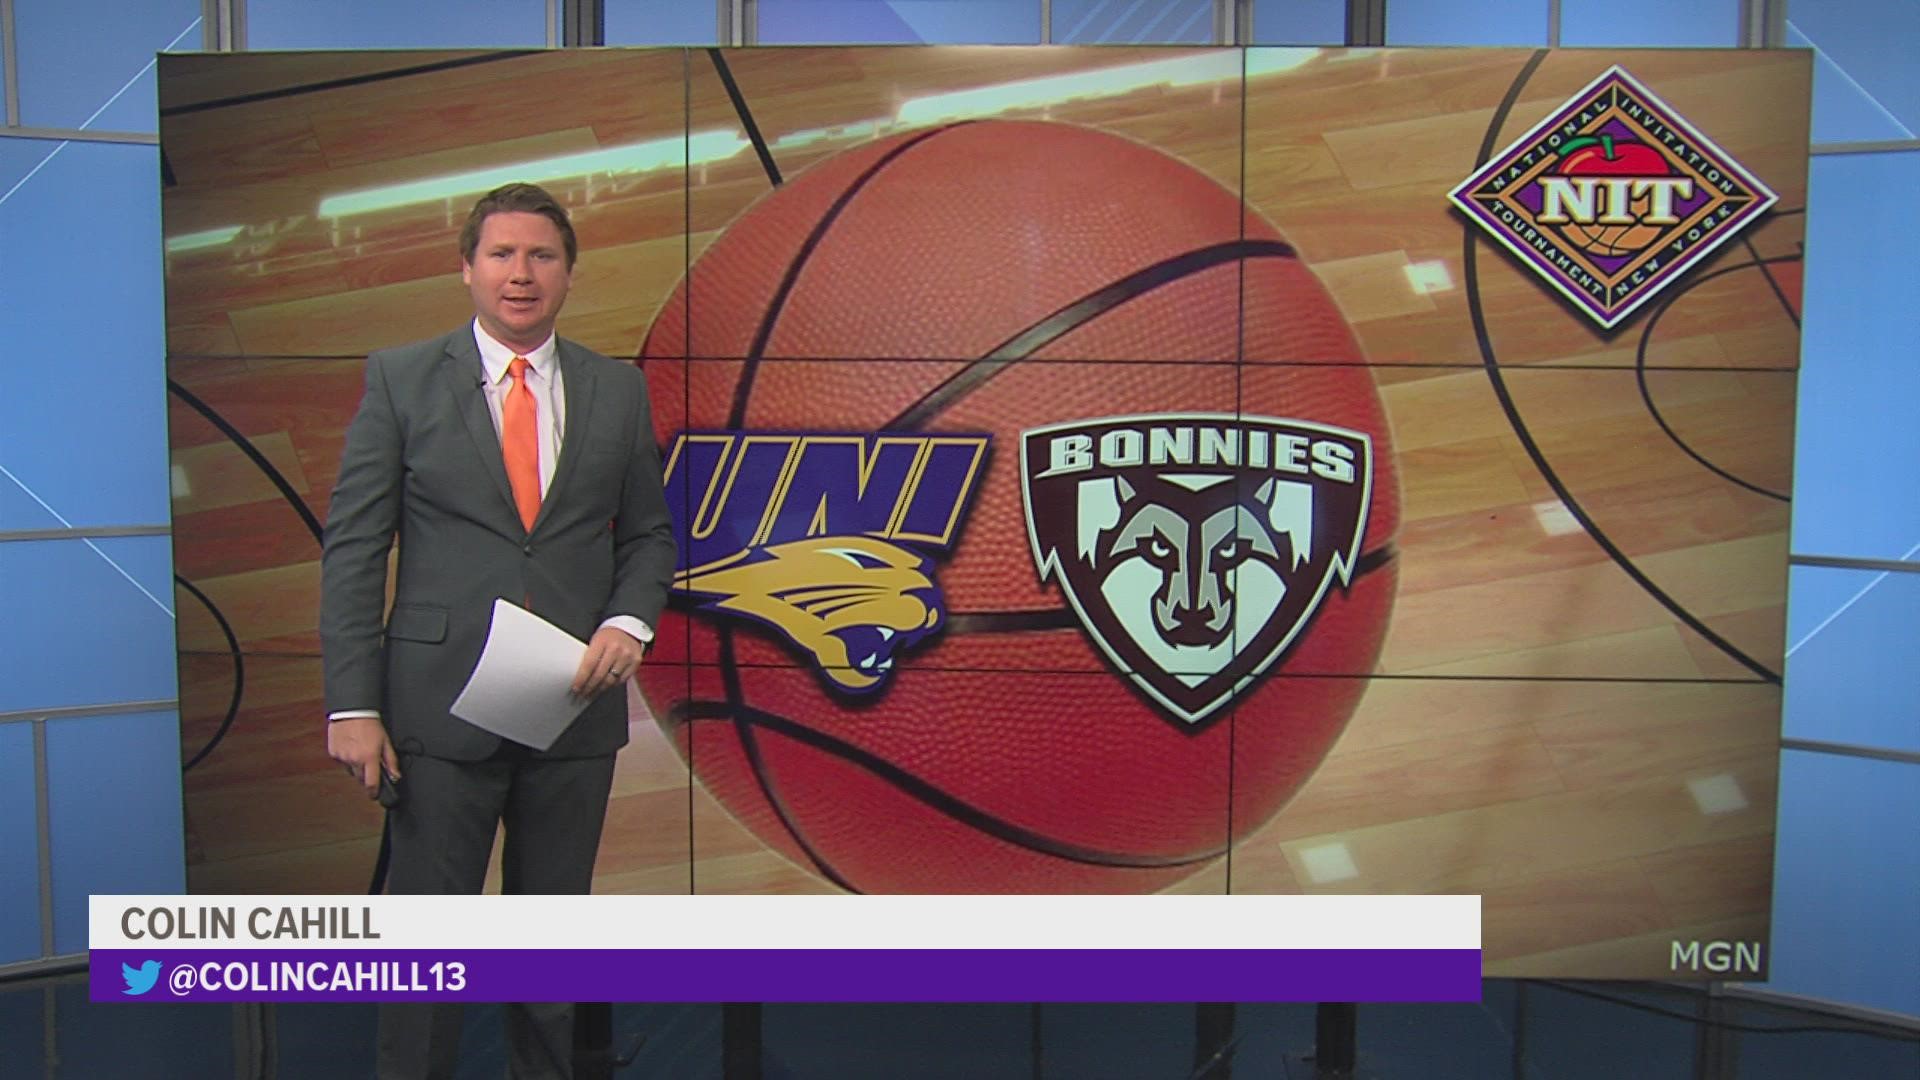 AJ Green scored 35 points with four assists to lead Northern Iowa to a 90-80 win over No. 16 St. Bonaventure.